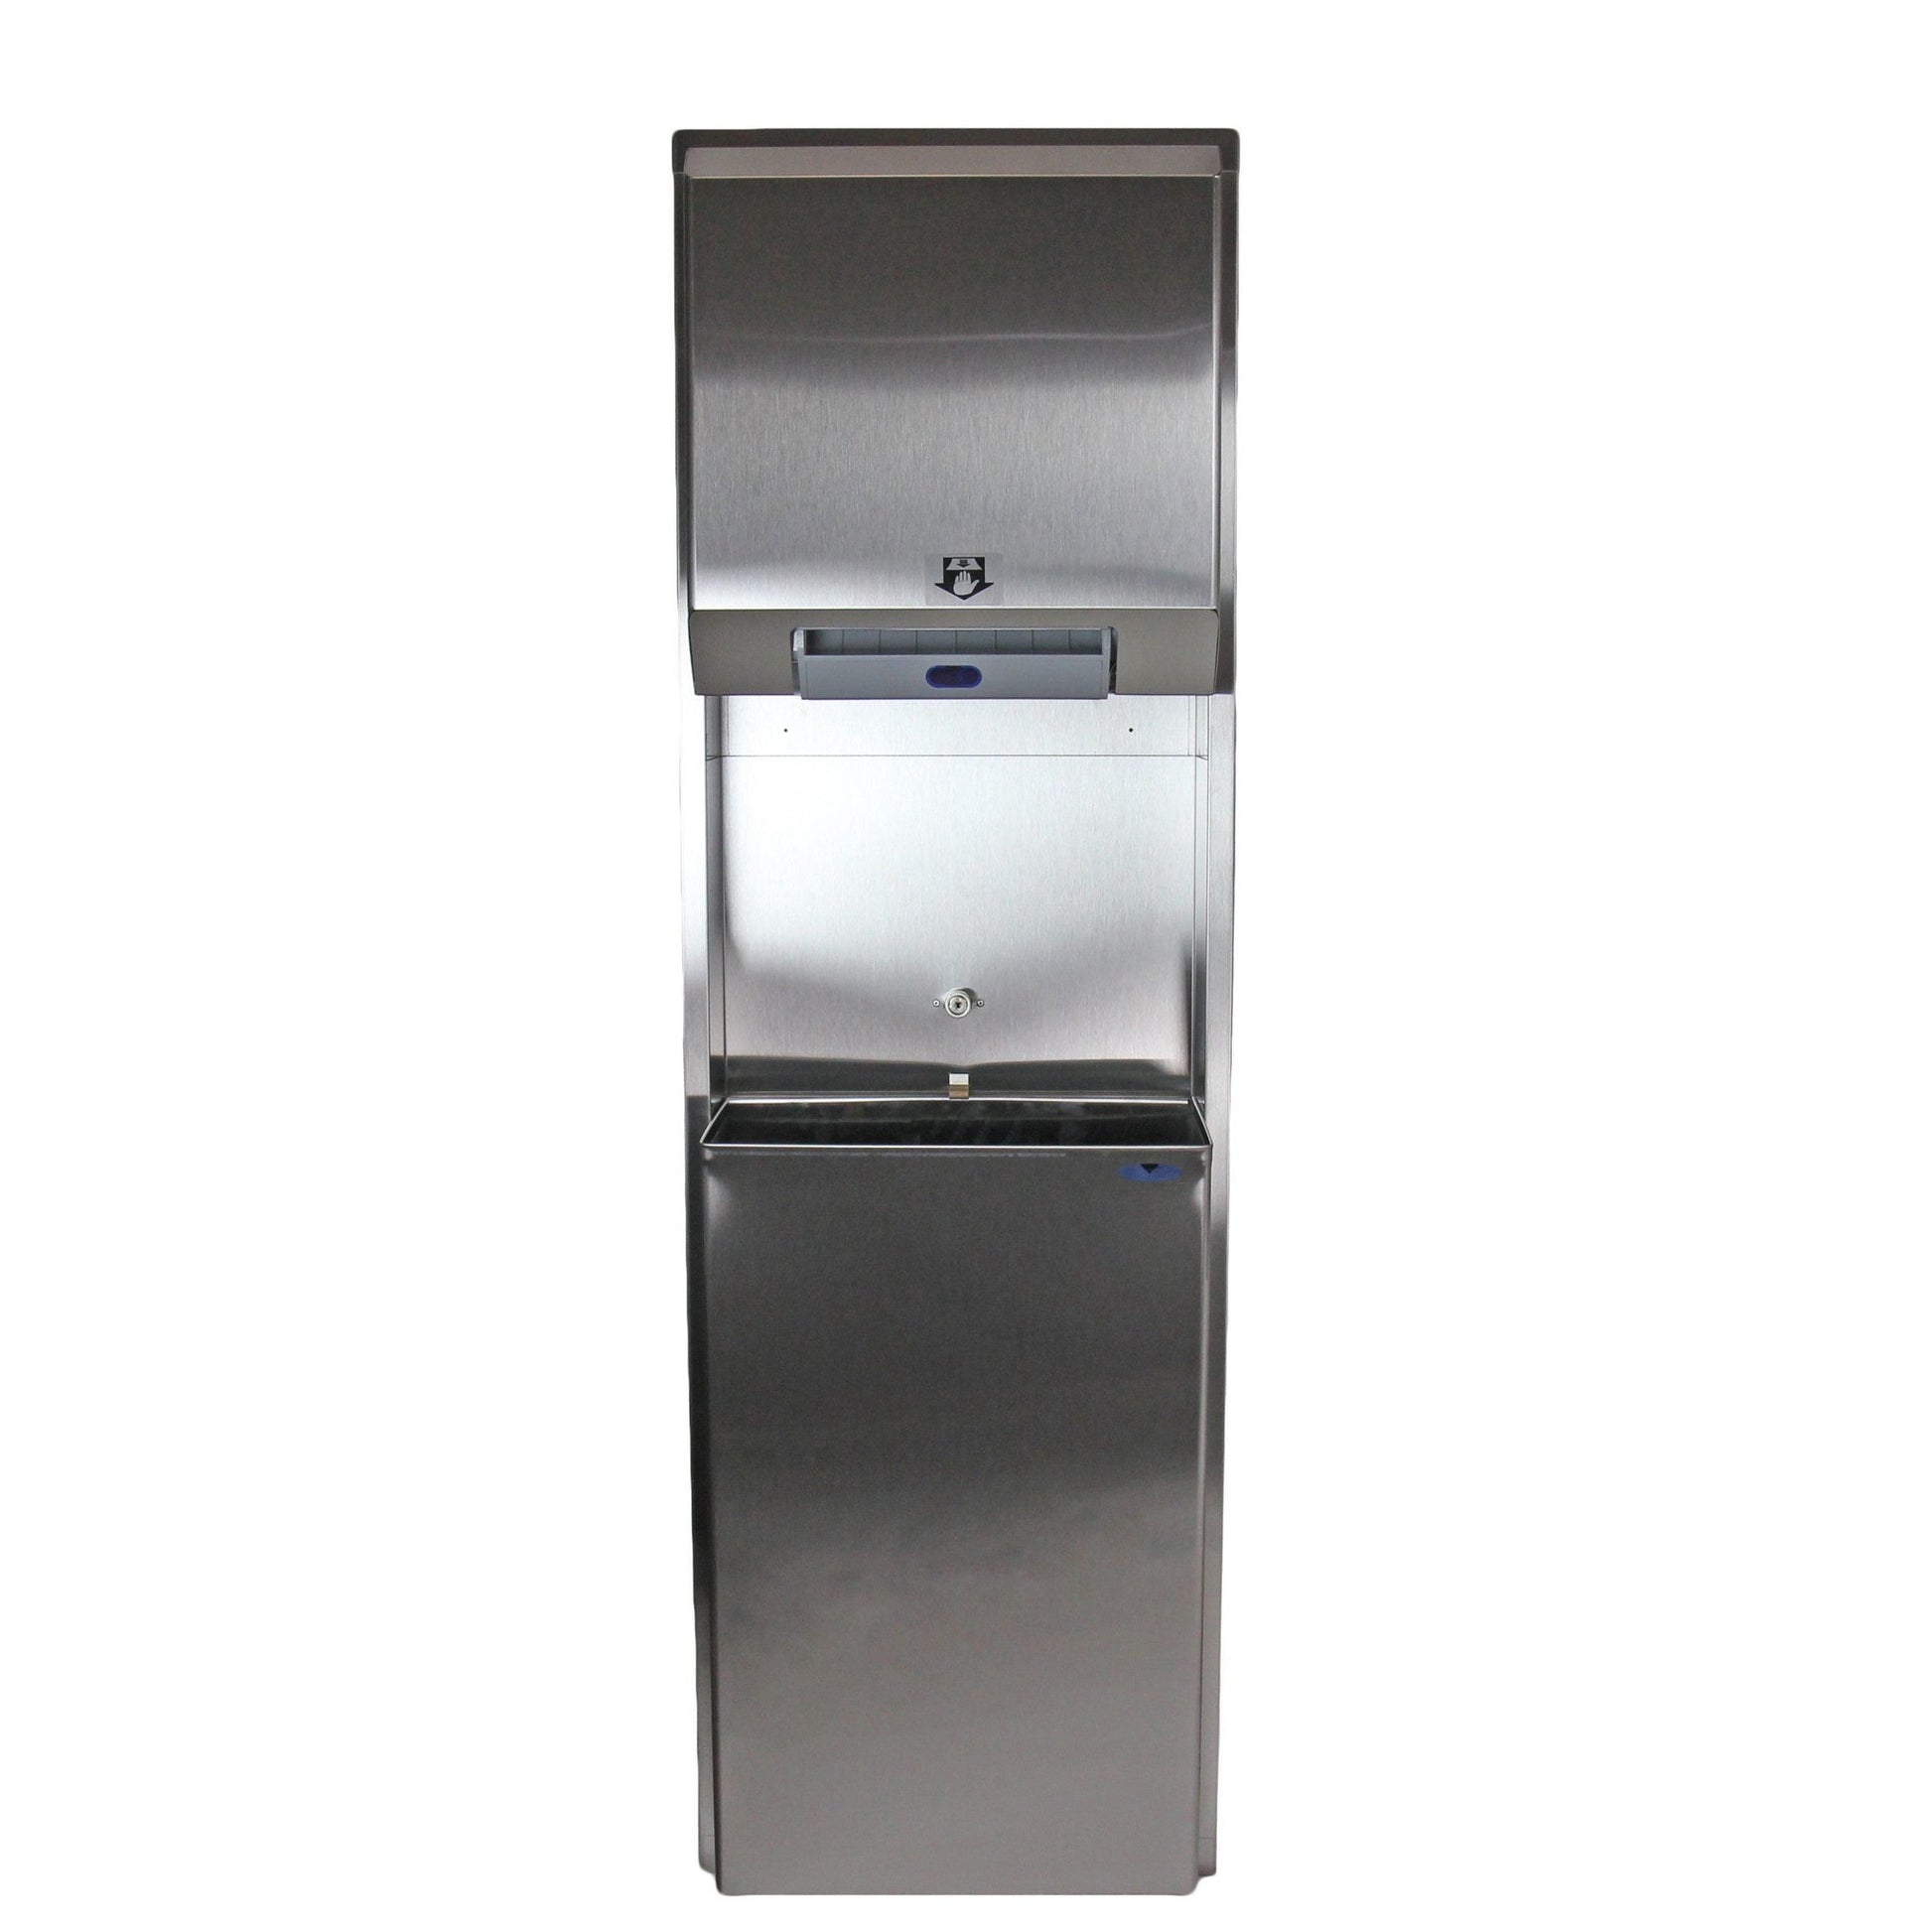 Frost 422-70C Wall Mounted Automatic Stainless Steel Paper Dispensers and Disposals